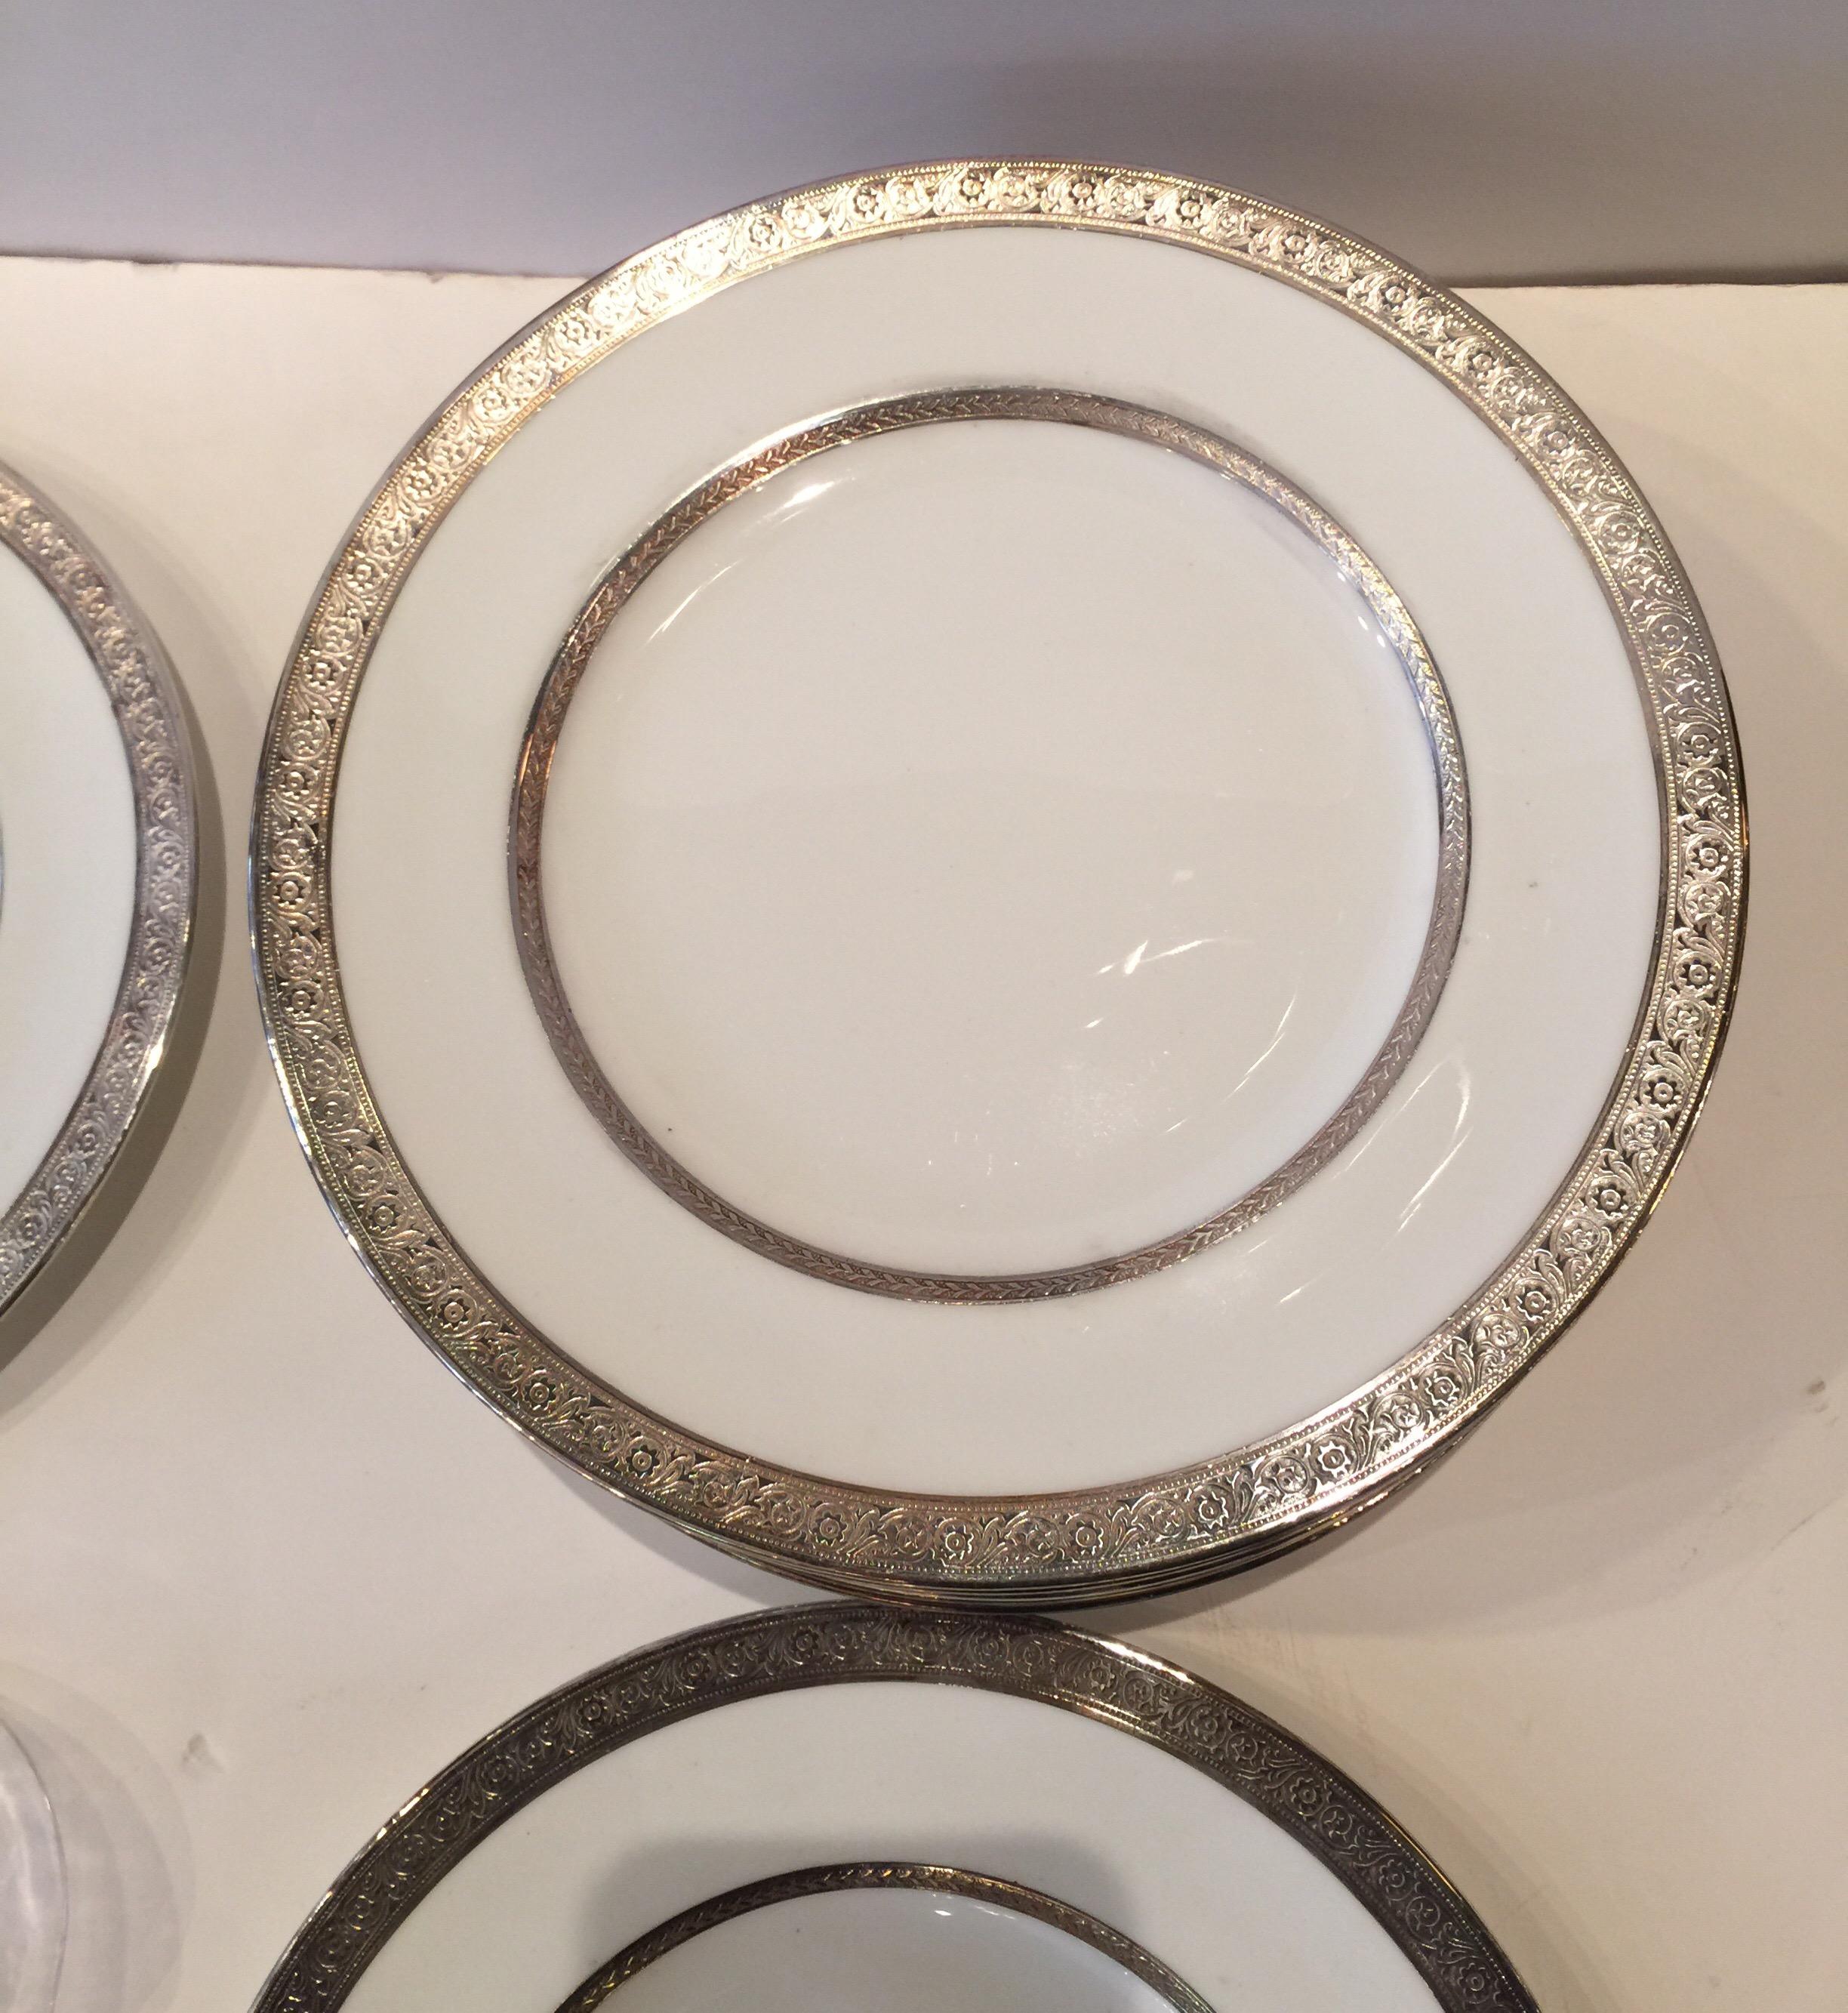 Mid-20th Century Set of Twelve Sterling Silver Overlay Dinner/Service Plates, England